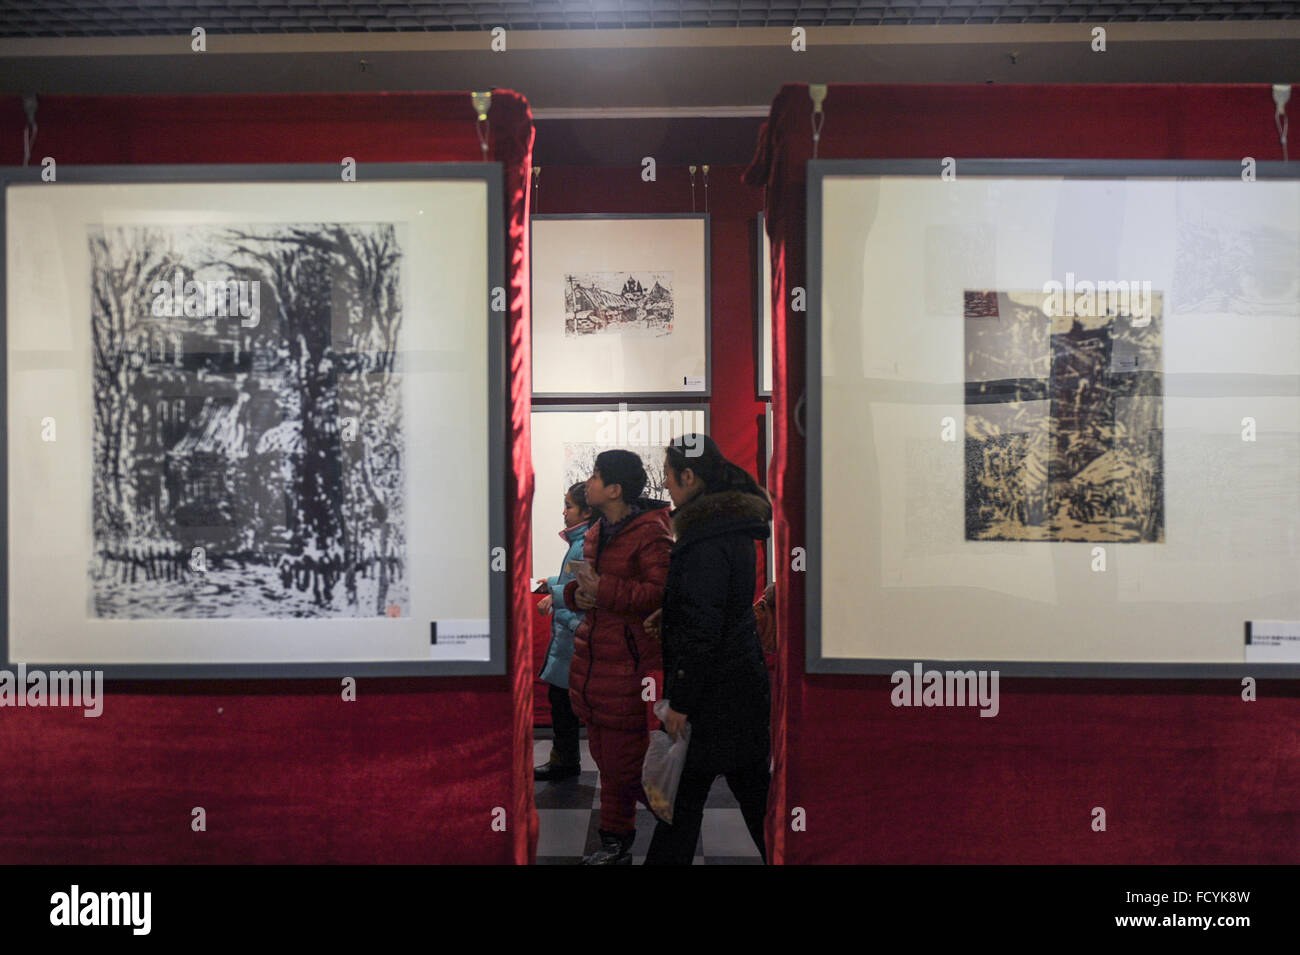 Harbin, China's Heilongjiang Province. 26th Jan, 2016. People visit an exhibition of ice engraving painting in Harbin, capital of northeast China's Heilongjiang Province, Jan. 26, 2016. The pictures on display were printed from engraved ice slabs, according to artist Zhu Xiaodong. He said each ice slab was able to print out some 20 pages yielding variant results as the ice melted down. © Wang Song/Xinhua/Alamy Live News Stock Photo